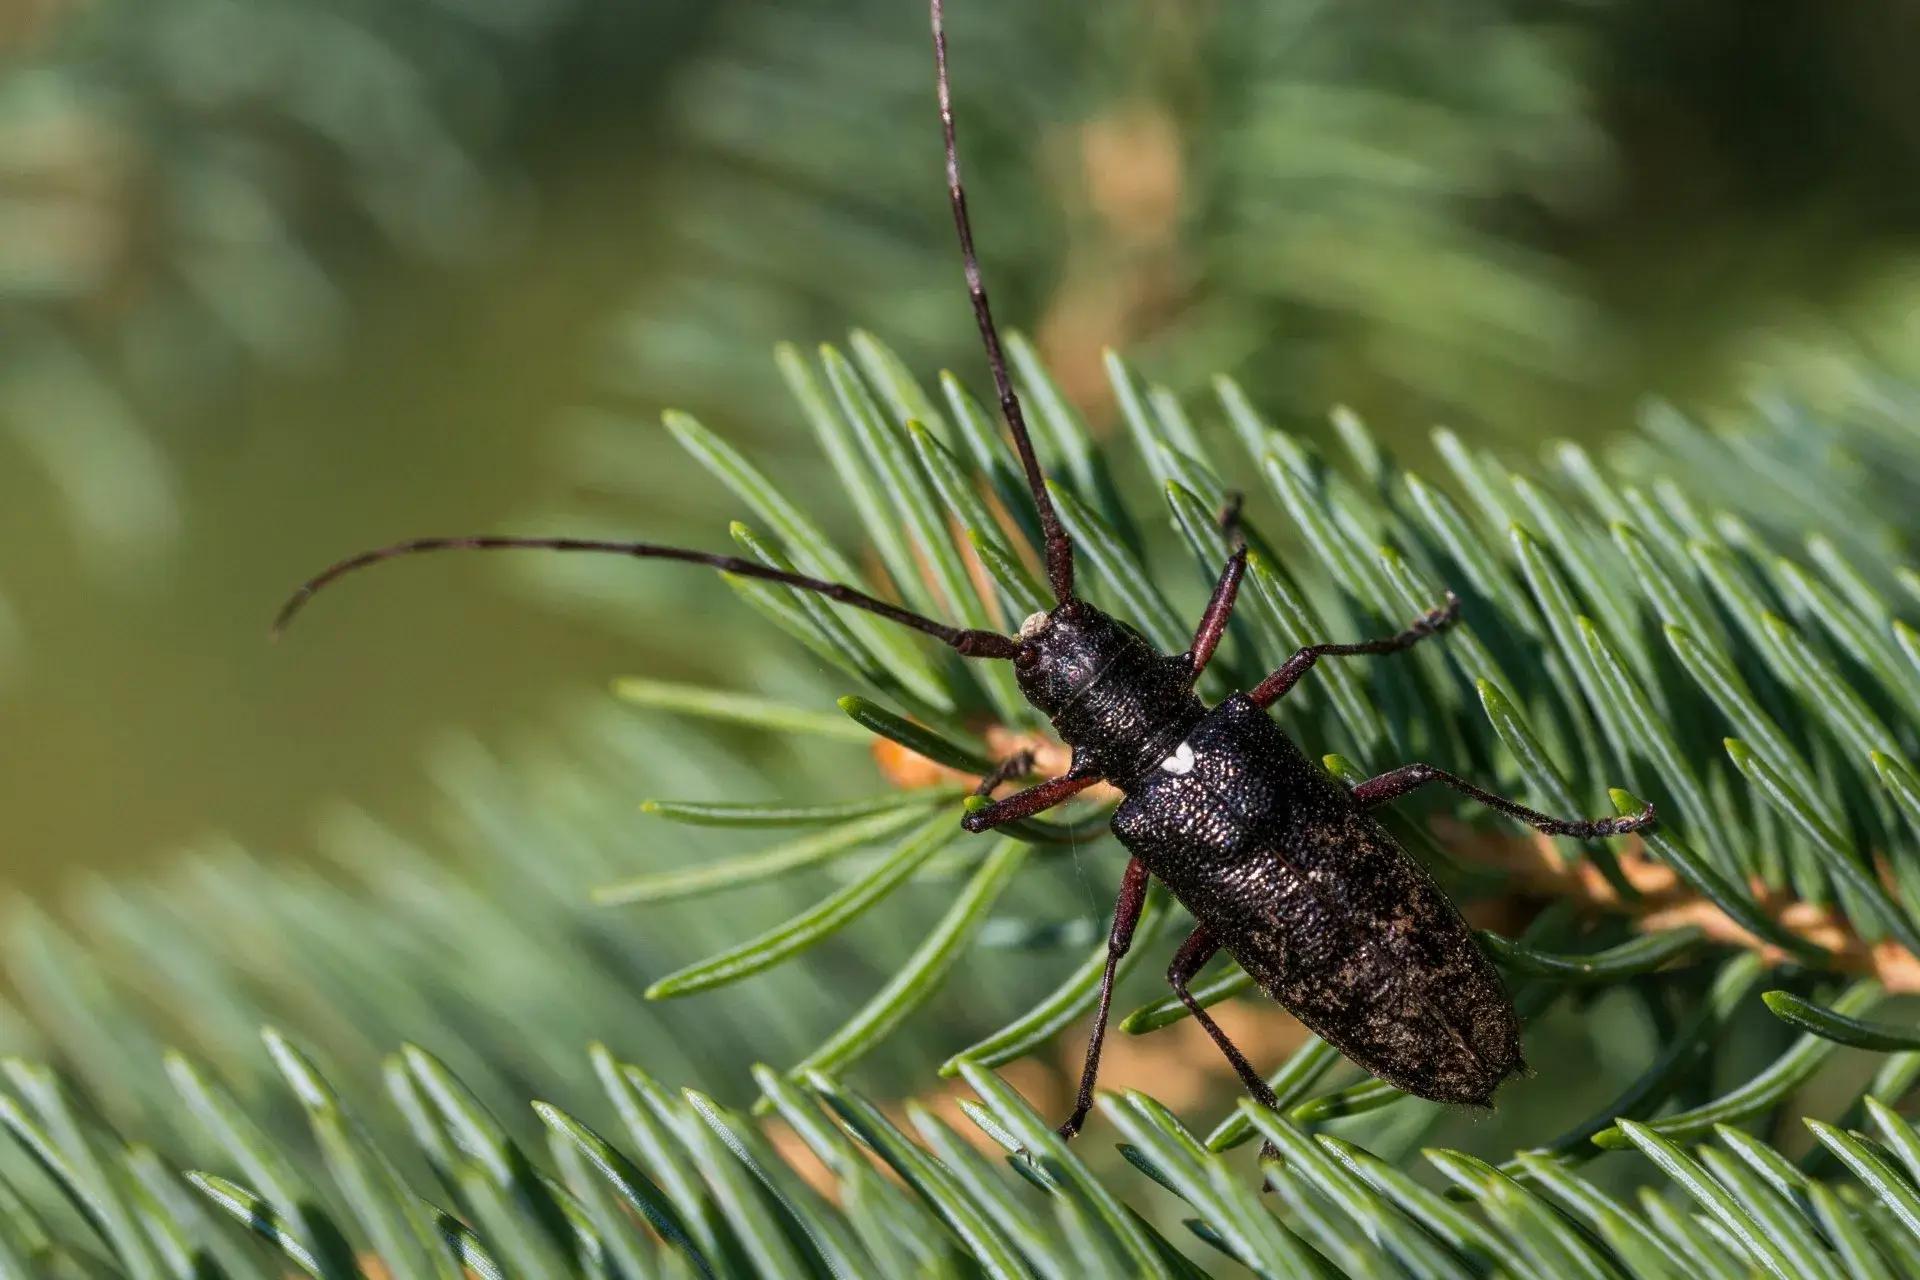 A black beetle perched on a pine tree branch